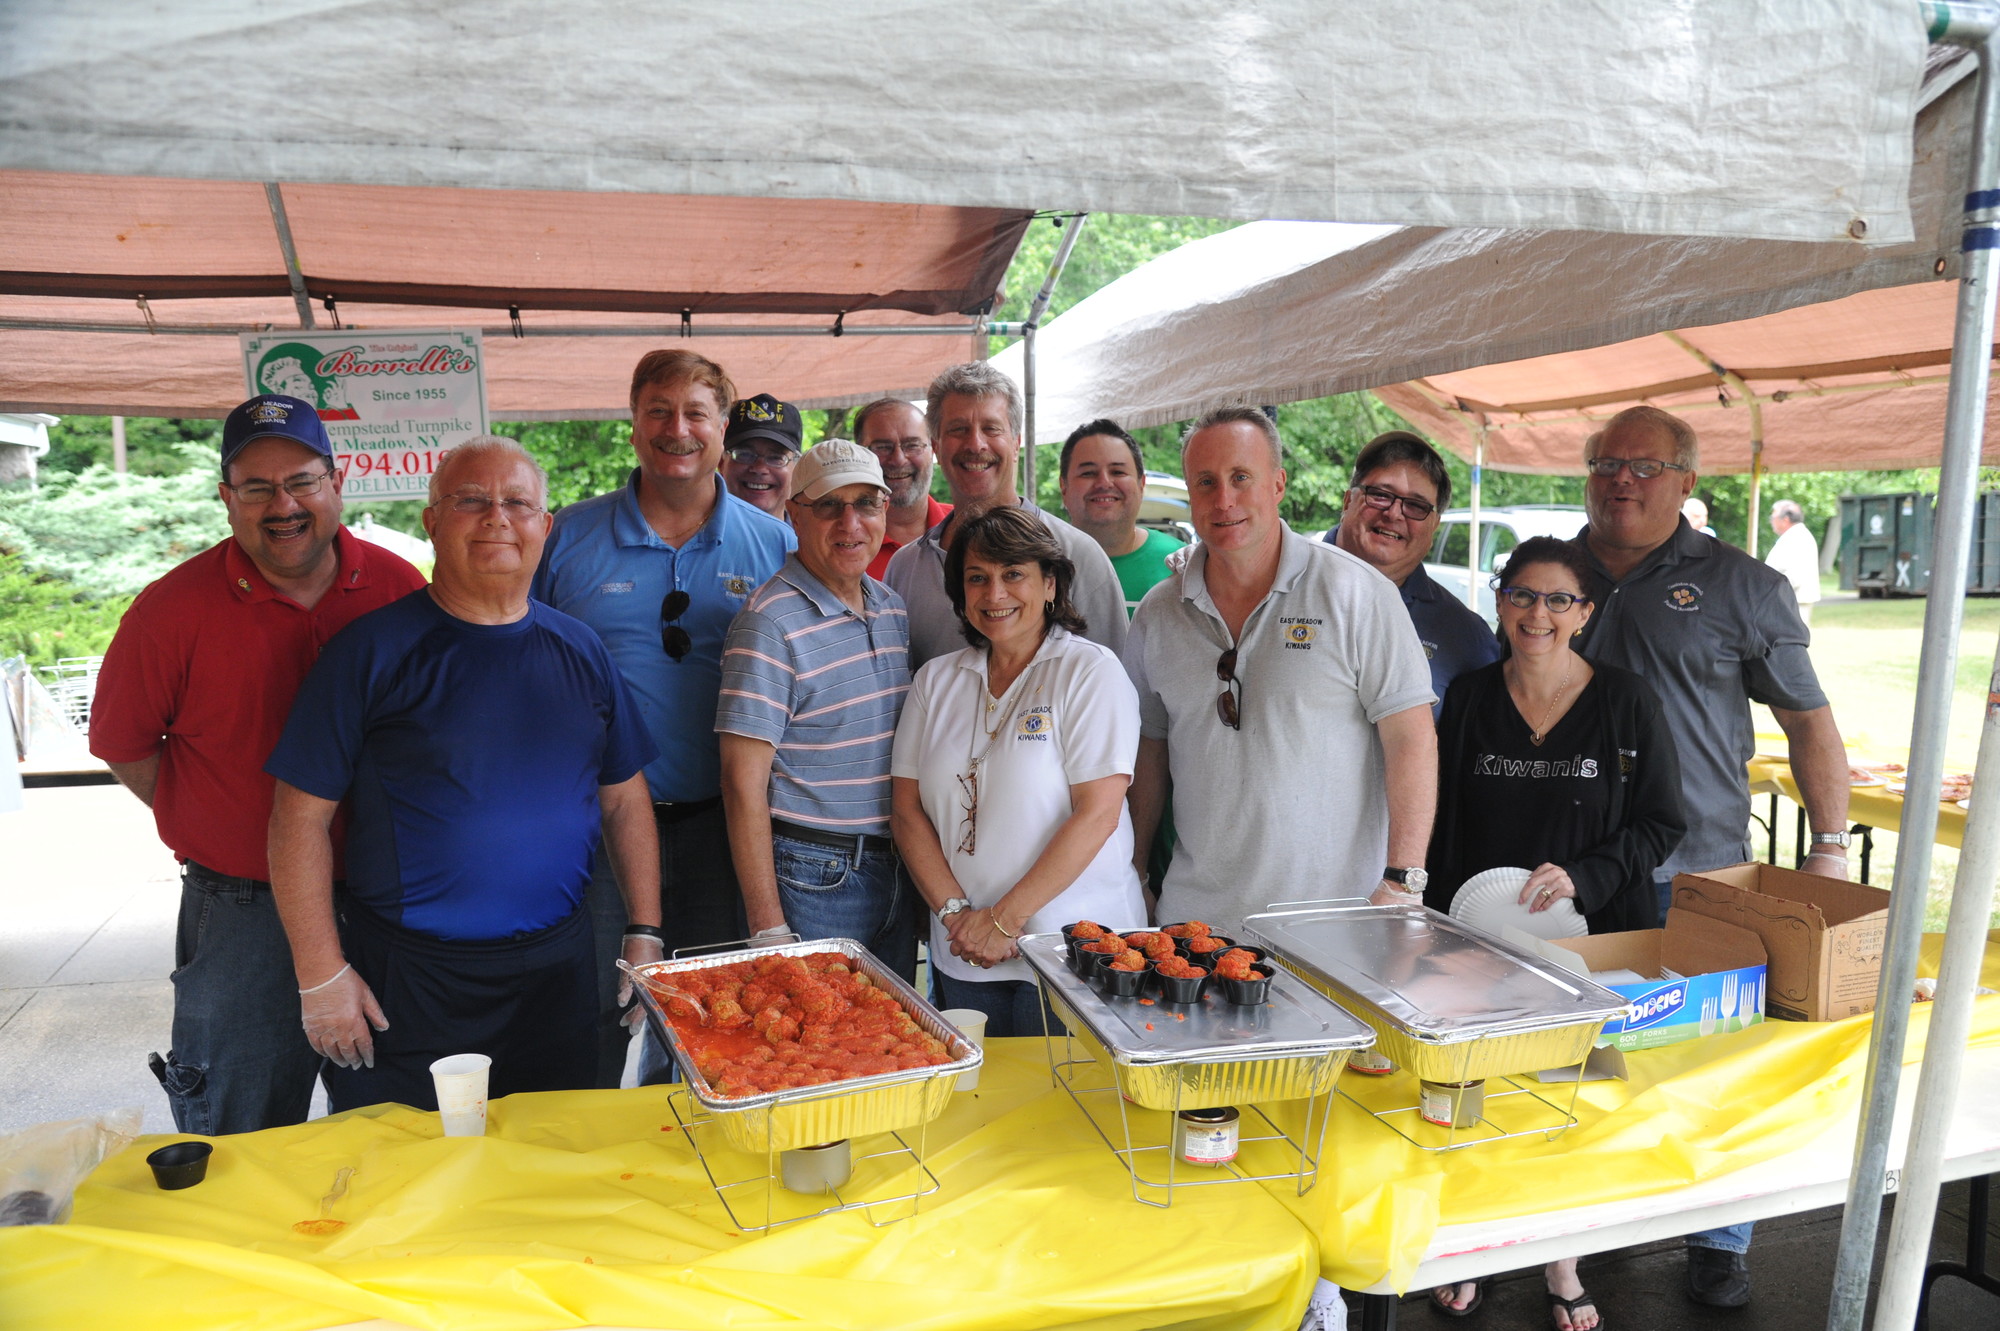 The 24th annual East Meadow Community Pride Day at Speno Park was   sponsored by the East Meadow Kiwanis Club.